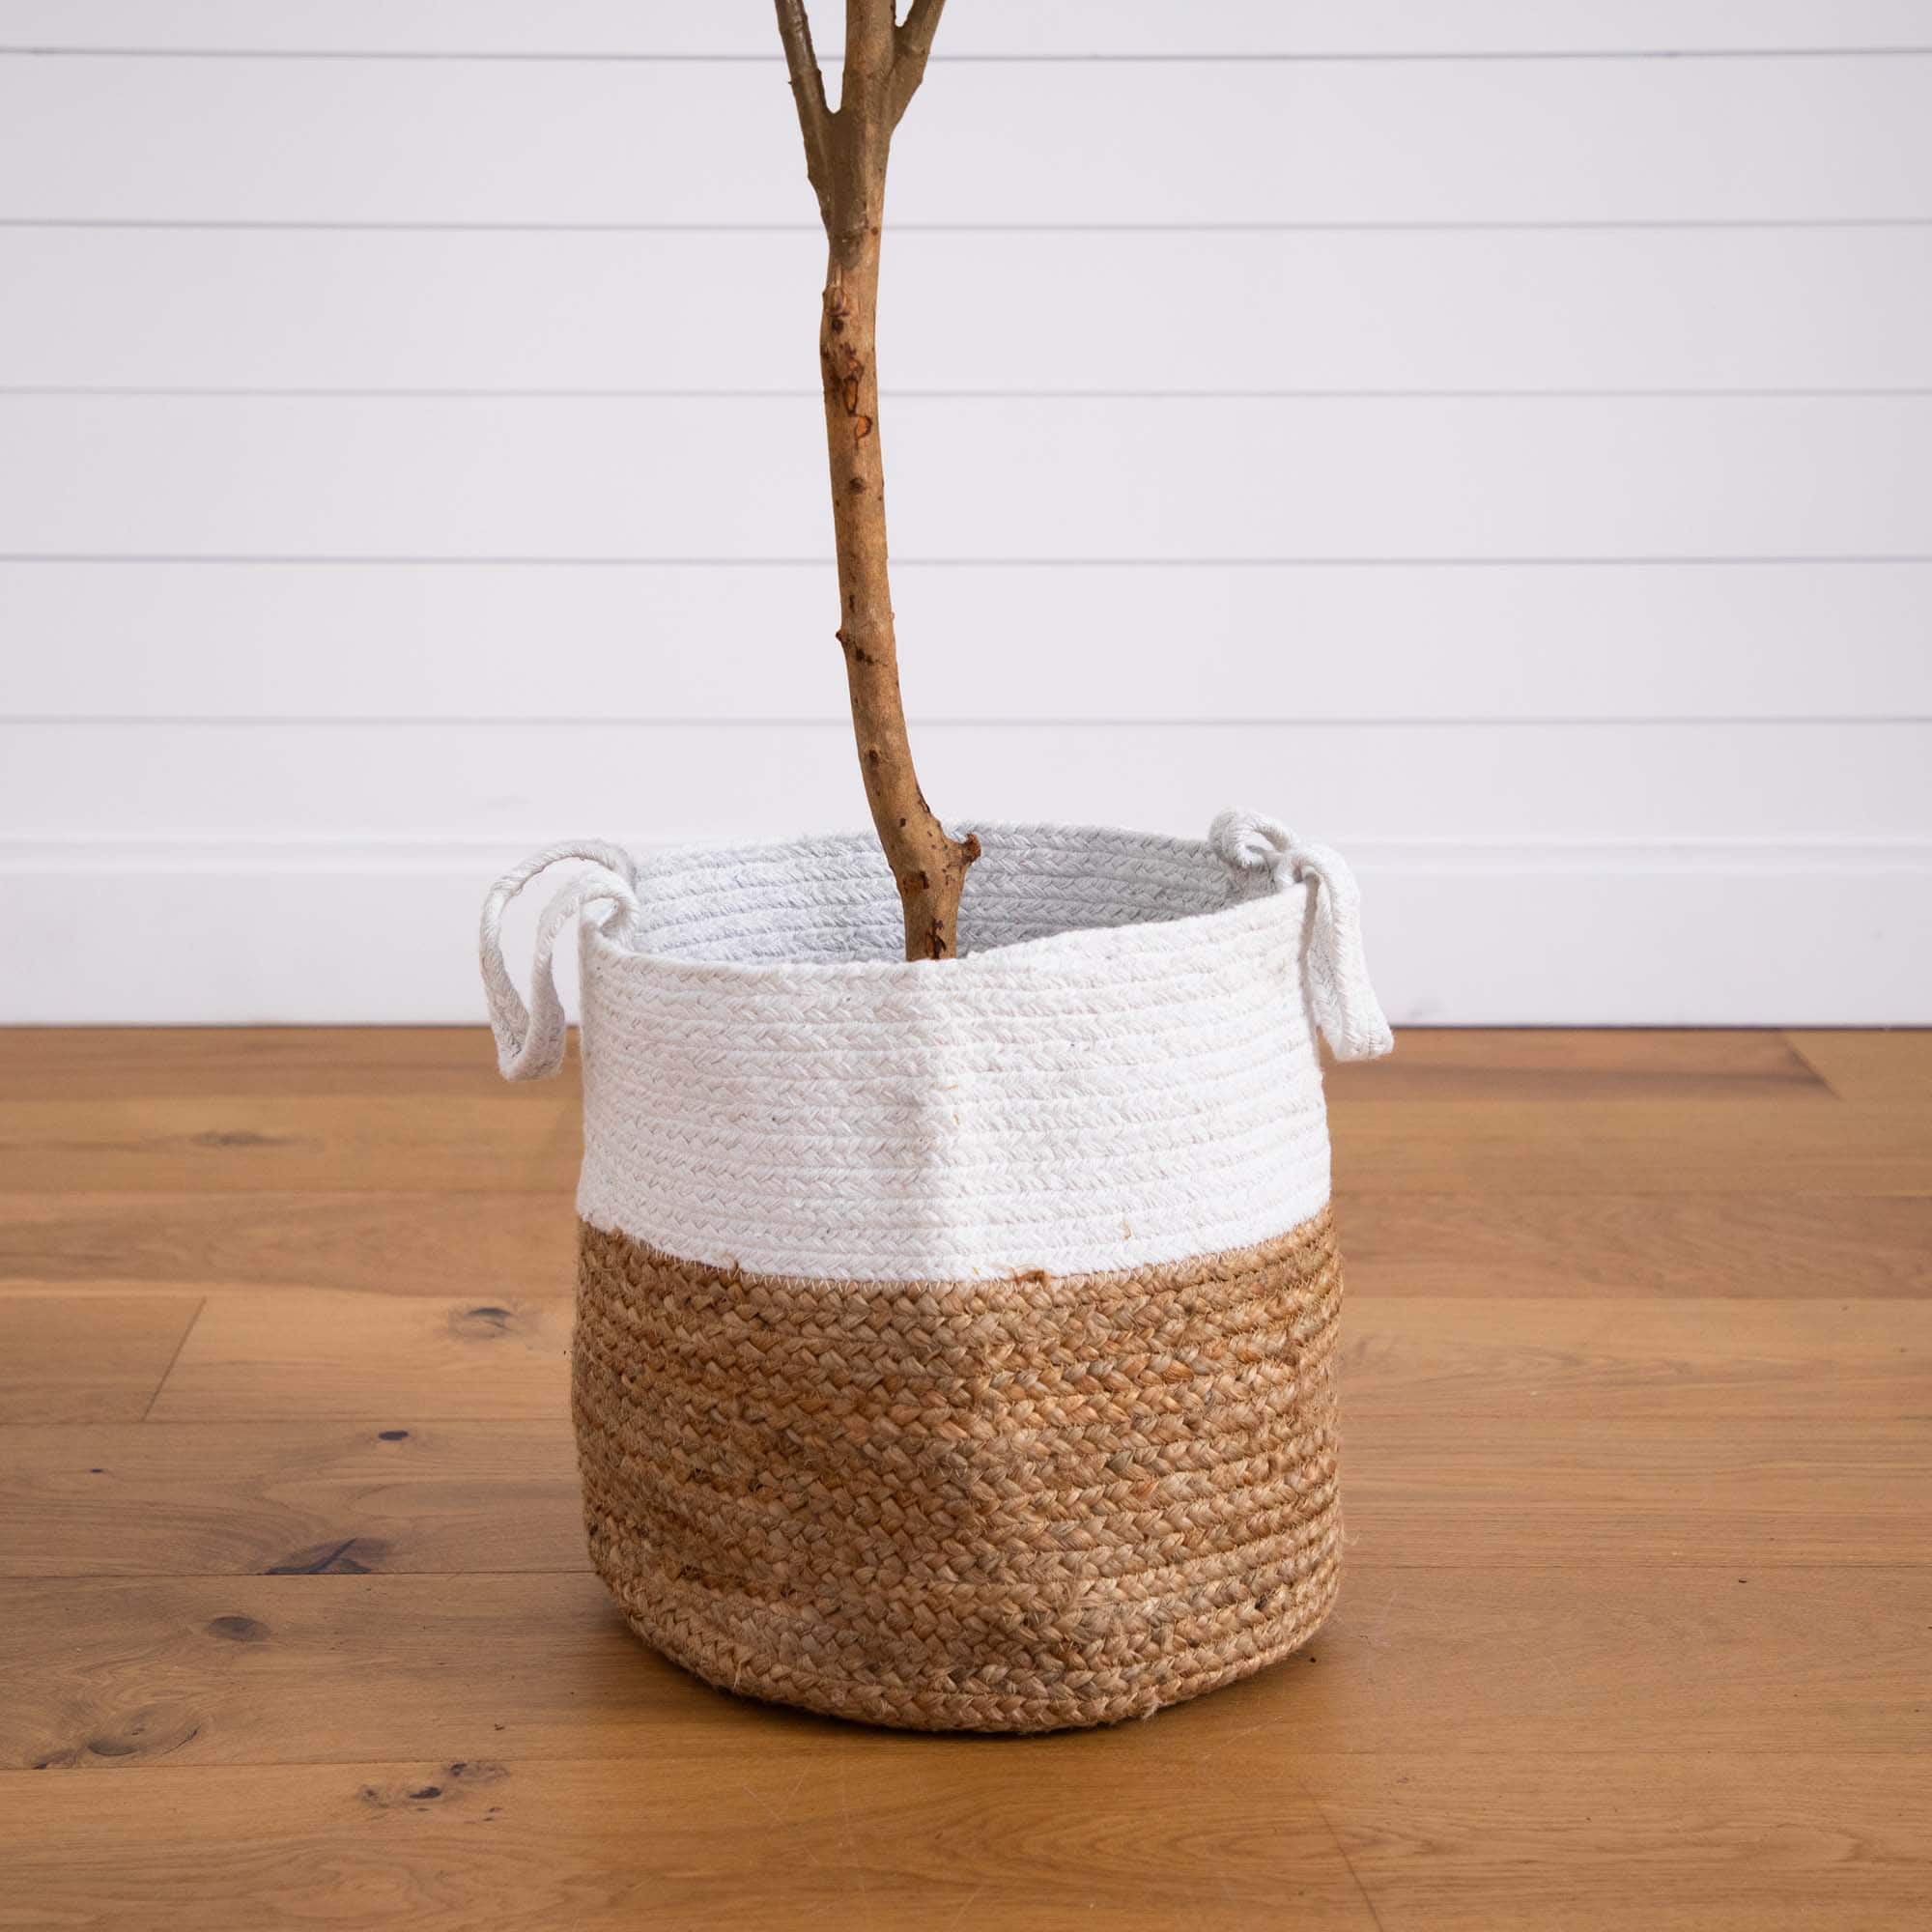 7ft. Olive Tree with Natural Trunk in Handmade Jute Basket